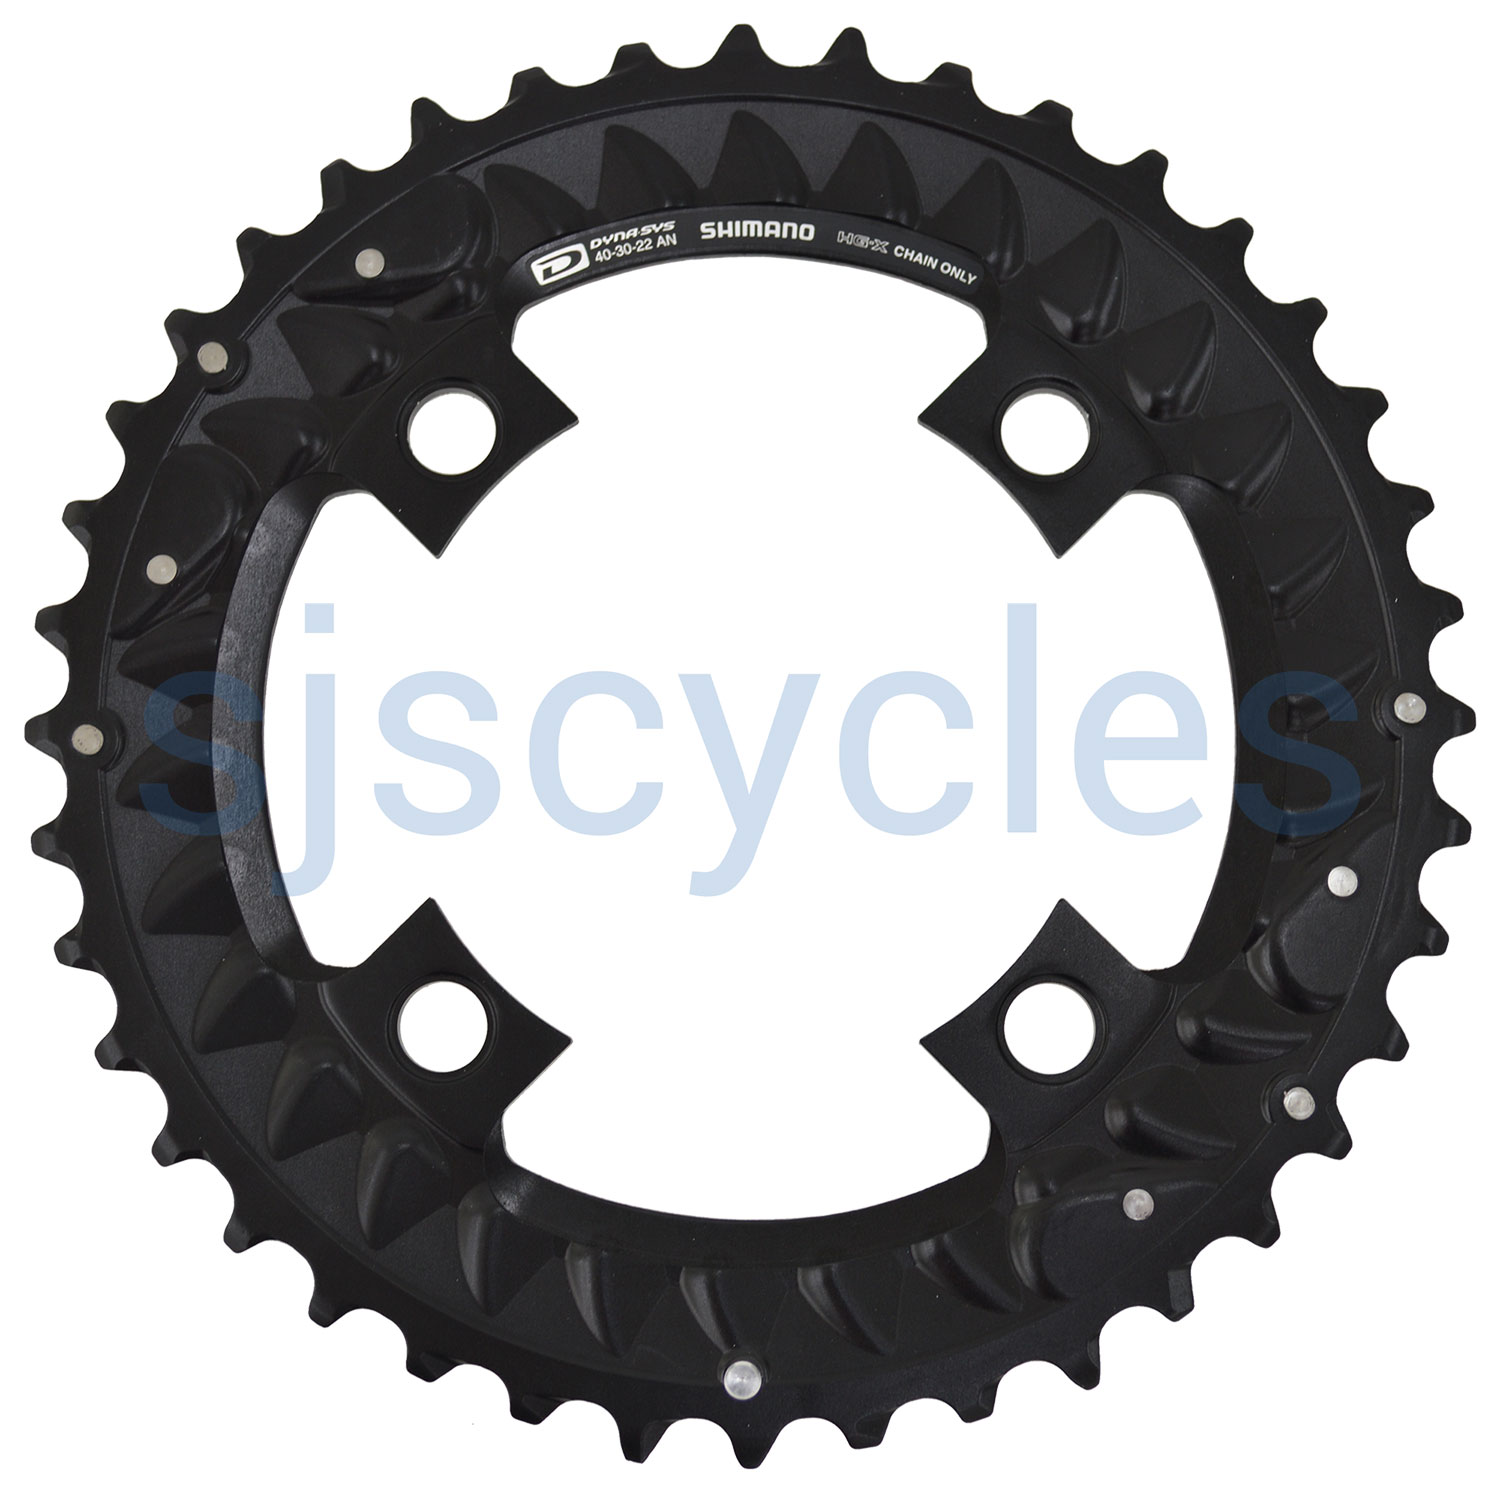 10 Speed 64mm BCD for 38-28t Set for sale online Shimano Deore Fc-m6000 28t Chainring 